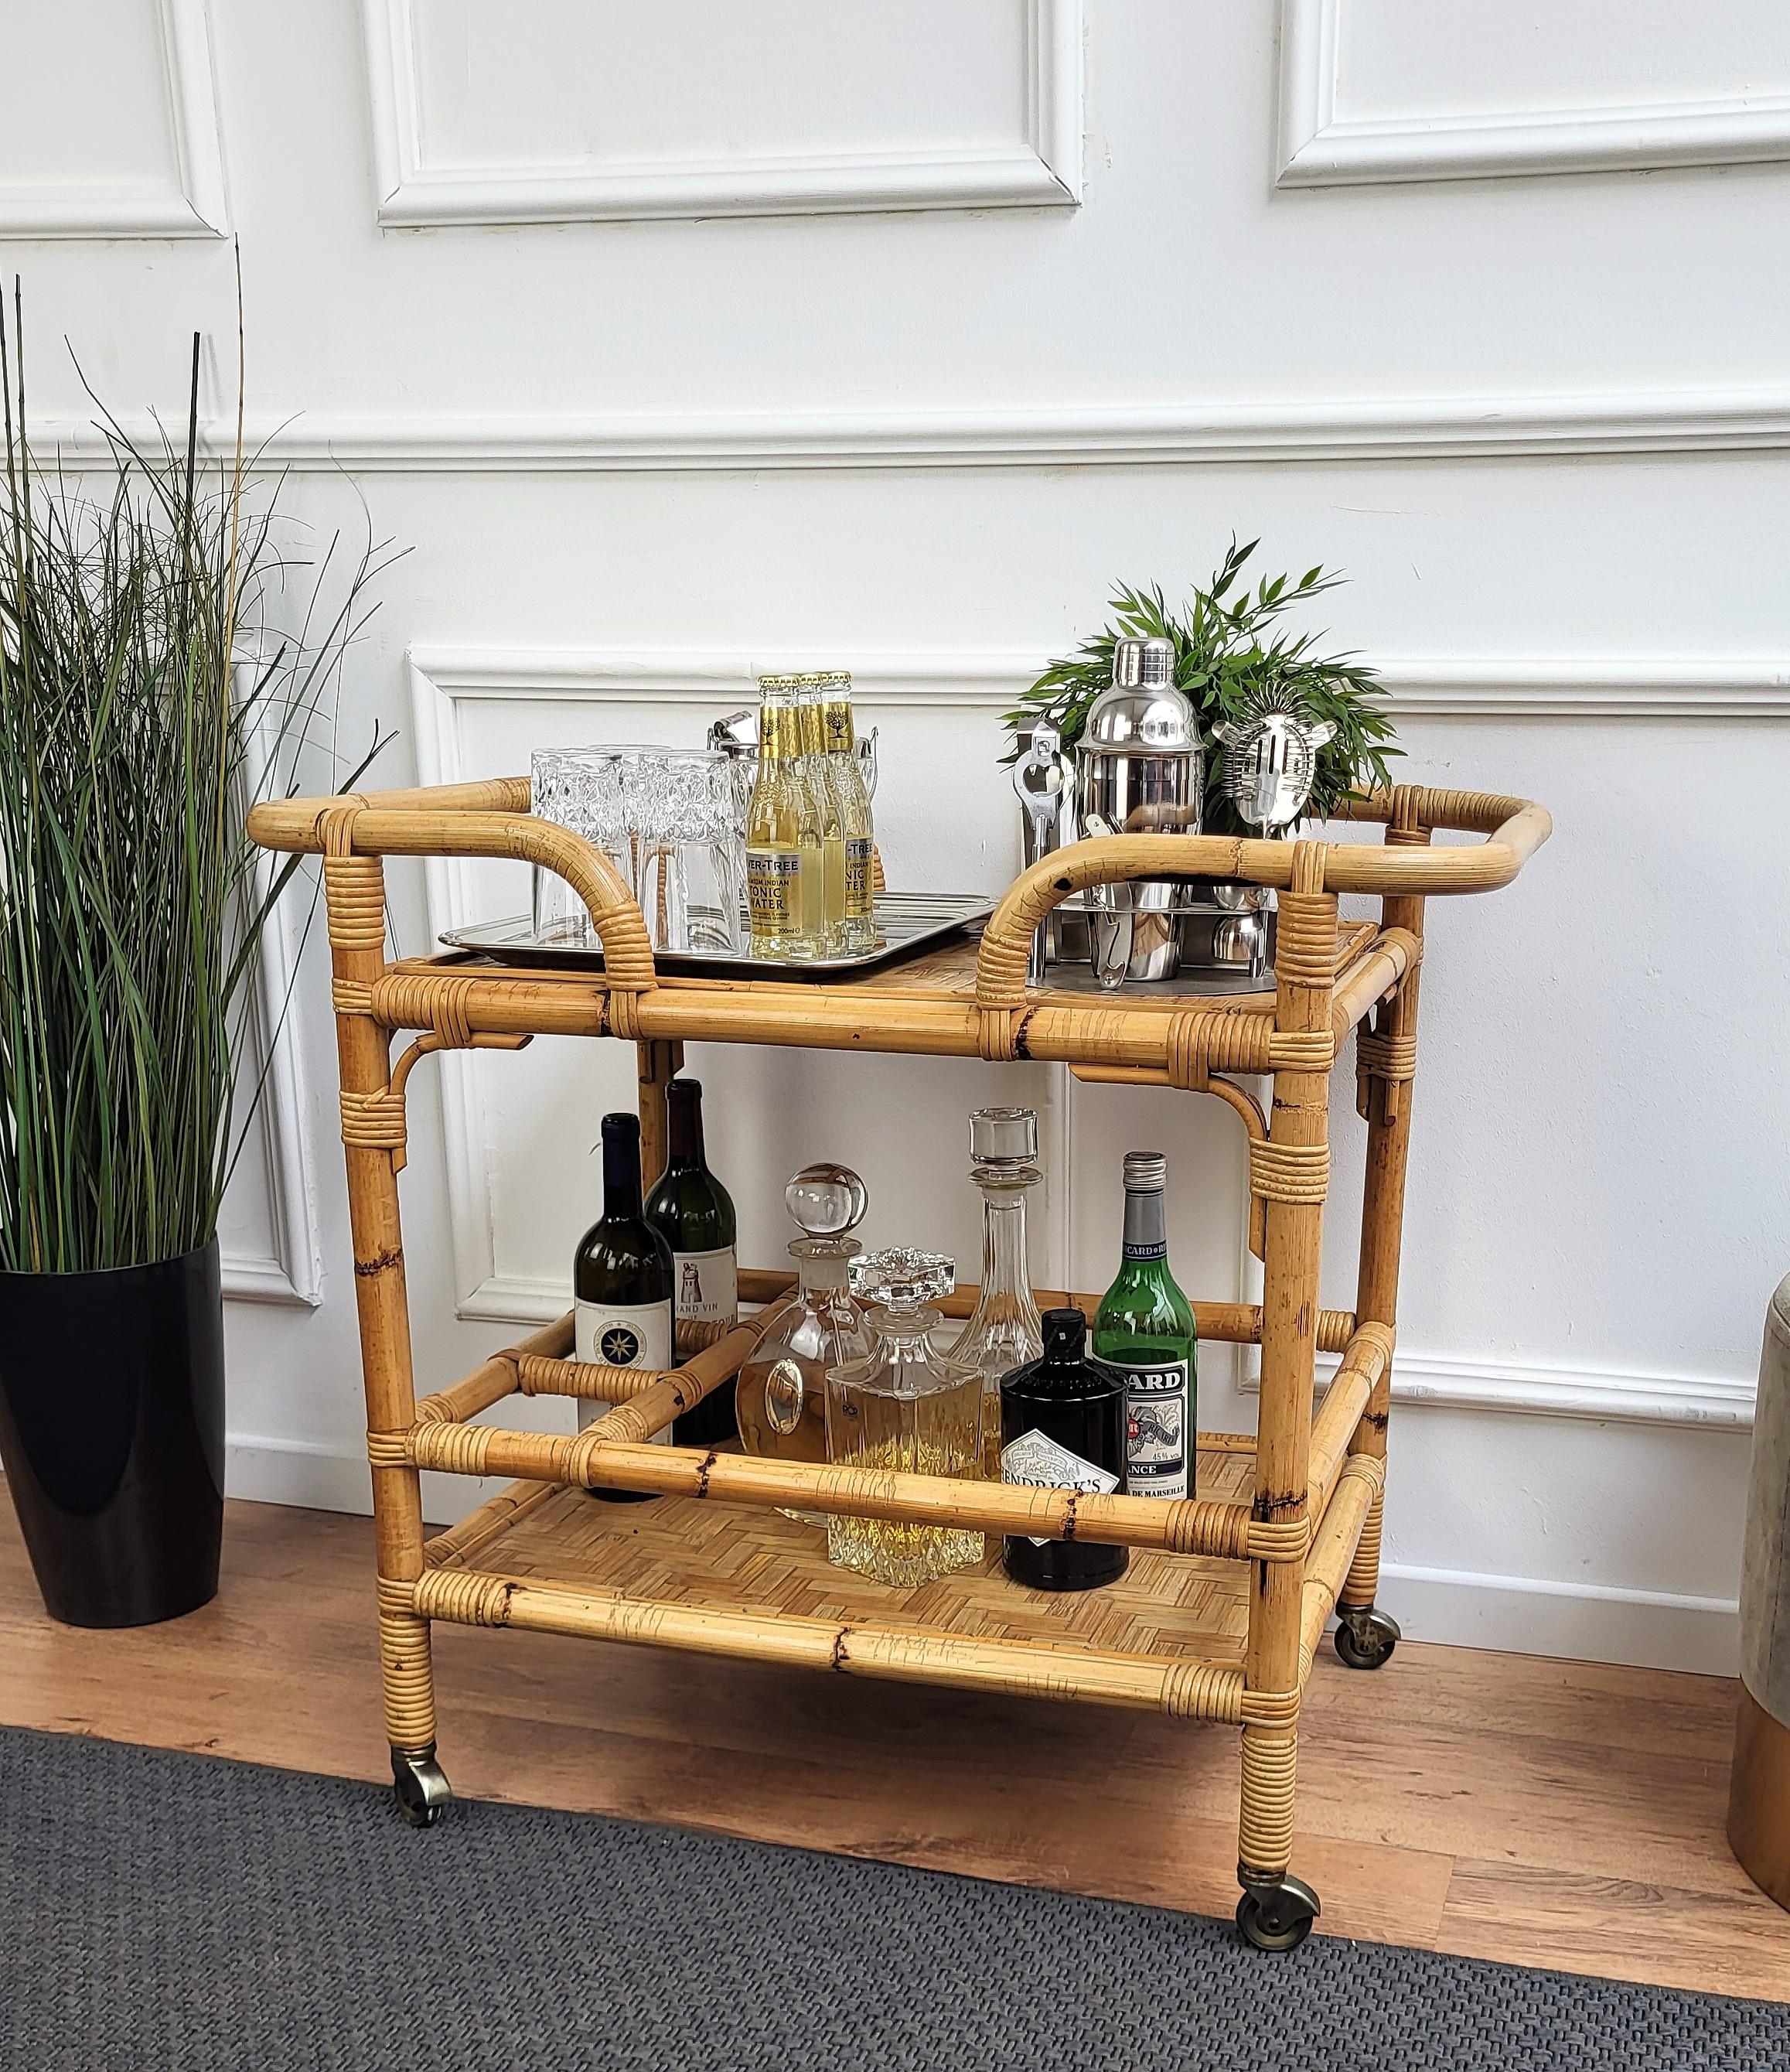 Beautiful 1970s Italian Mid-Century Modern serving bar cart trolley probably by the Italian Vittorio Bonacina featuring two levels, with the bottom one with three bottle holders. Made of rattan and bamboo. This charming piece is in the typical style